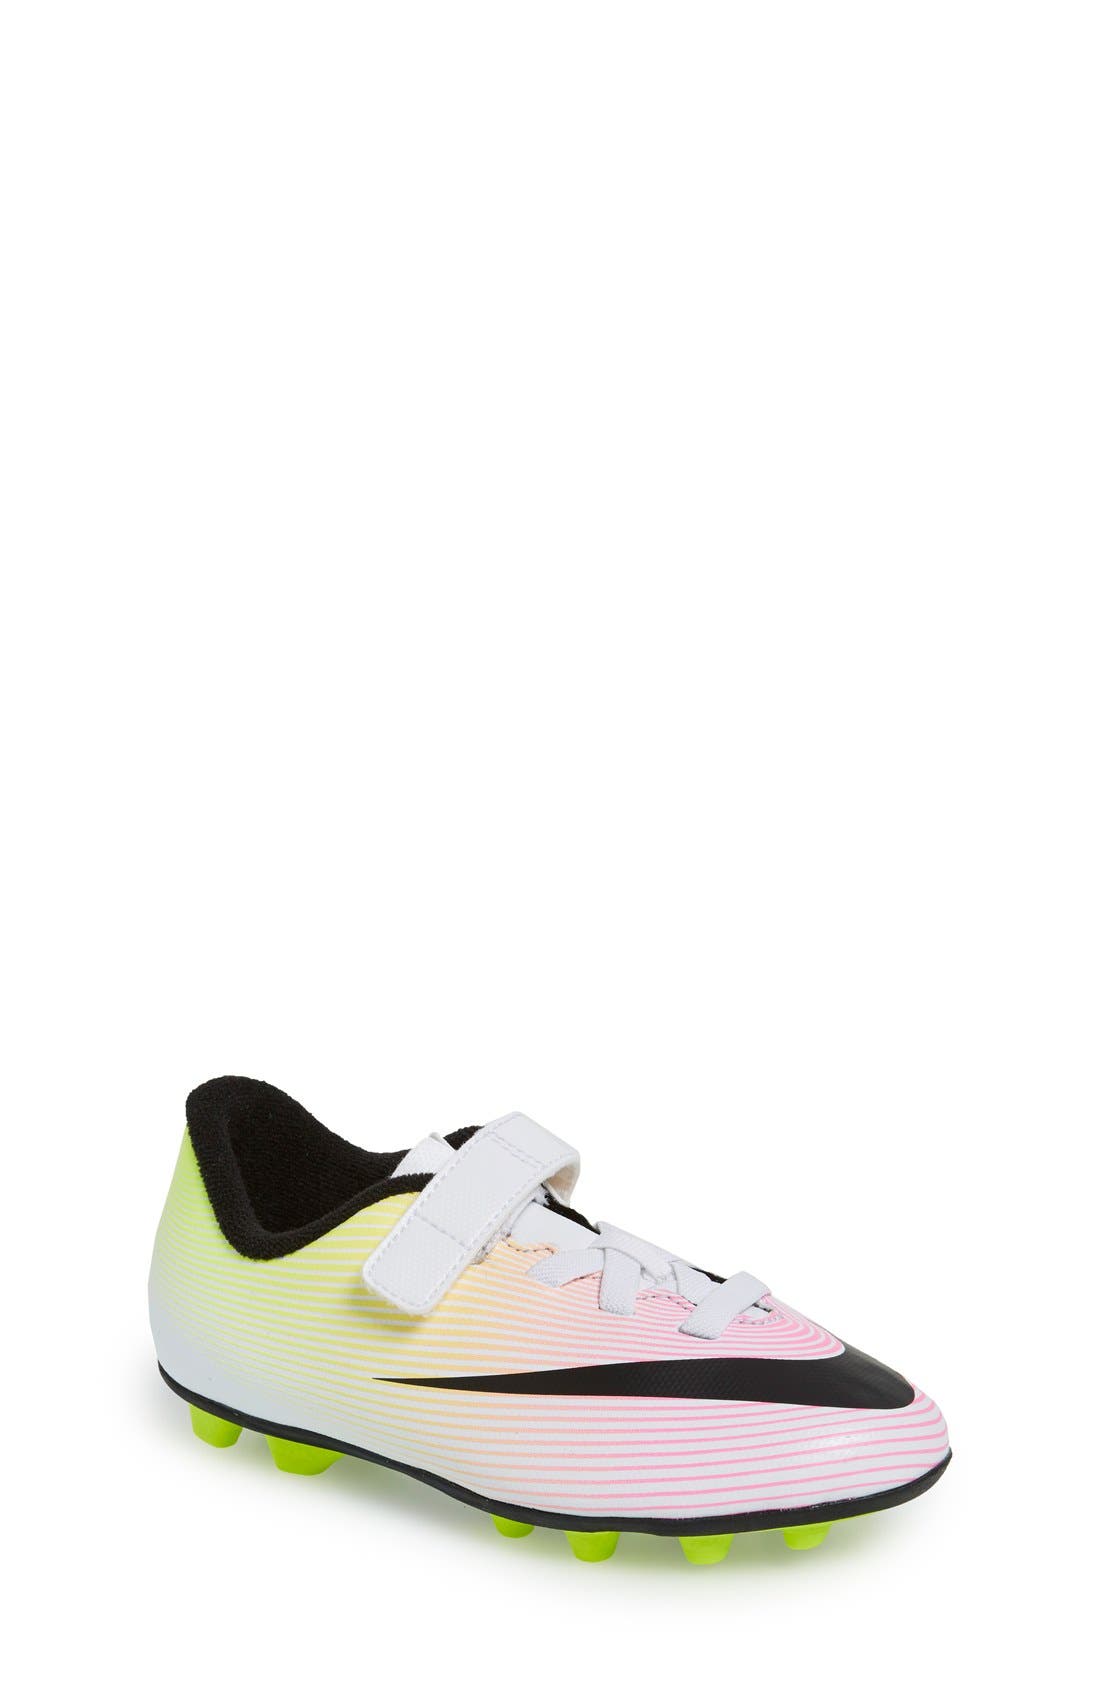 nordstrom soccer cleats